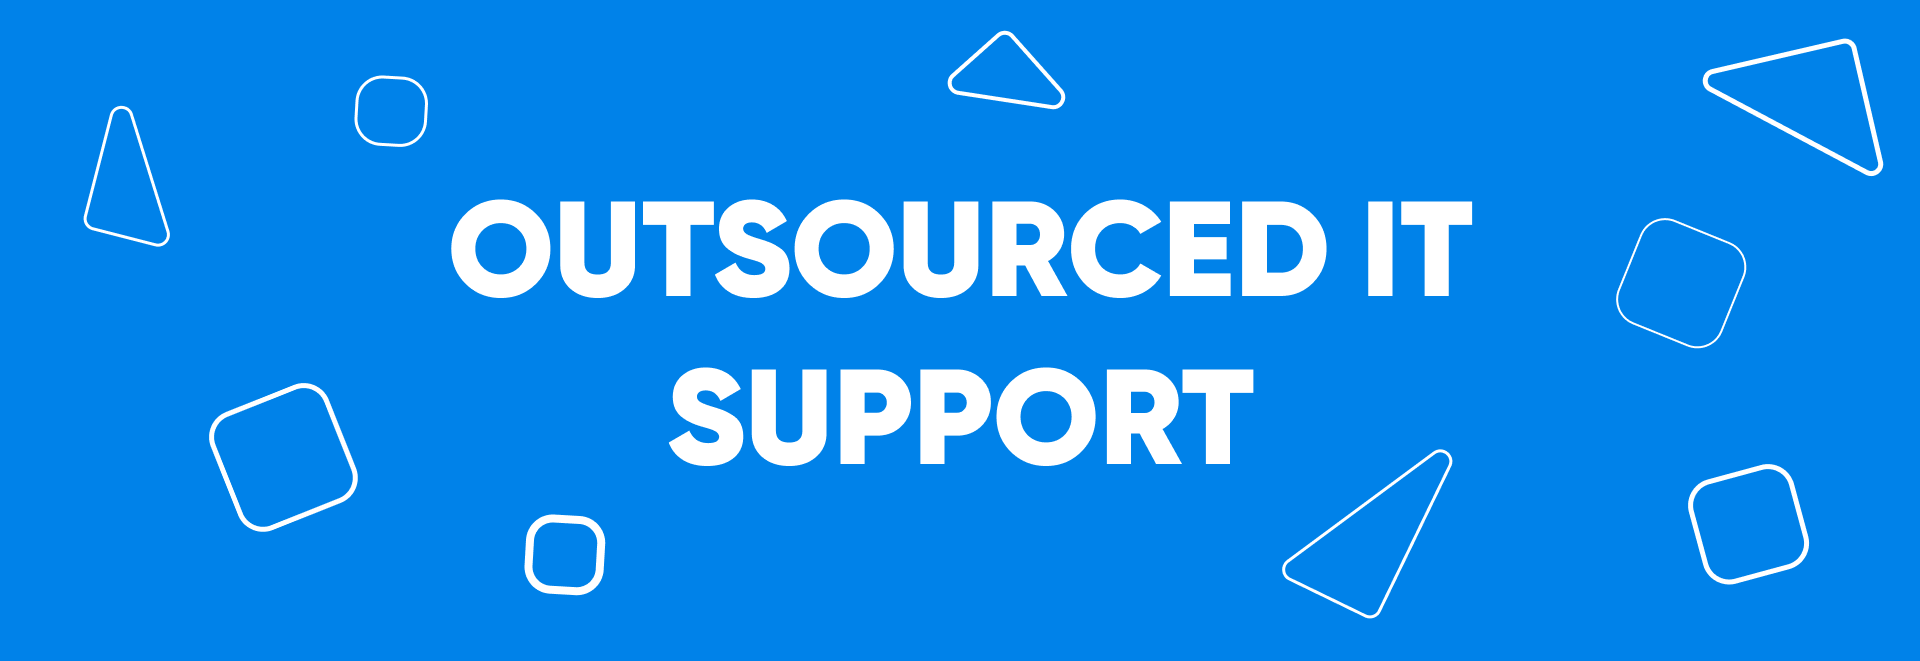 MWDN IT support outsourcing